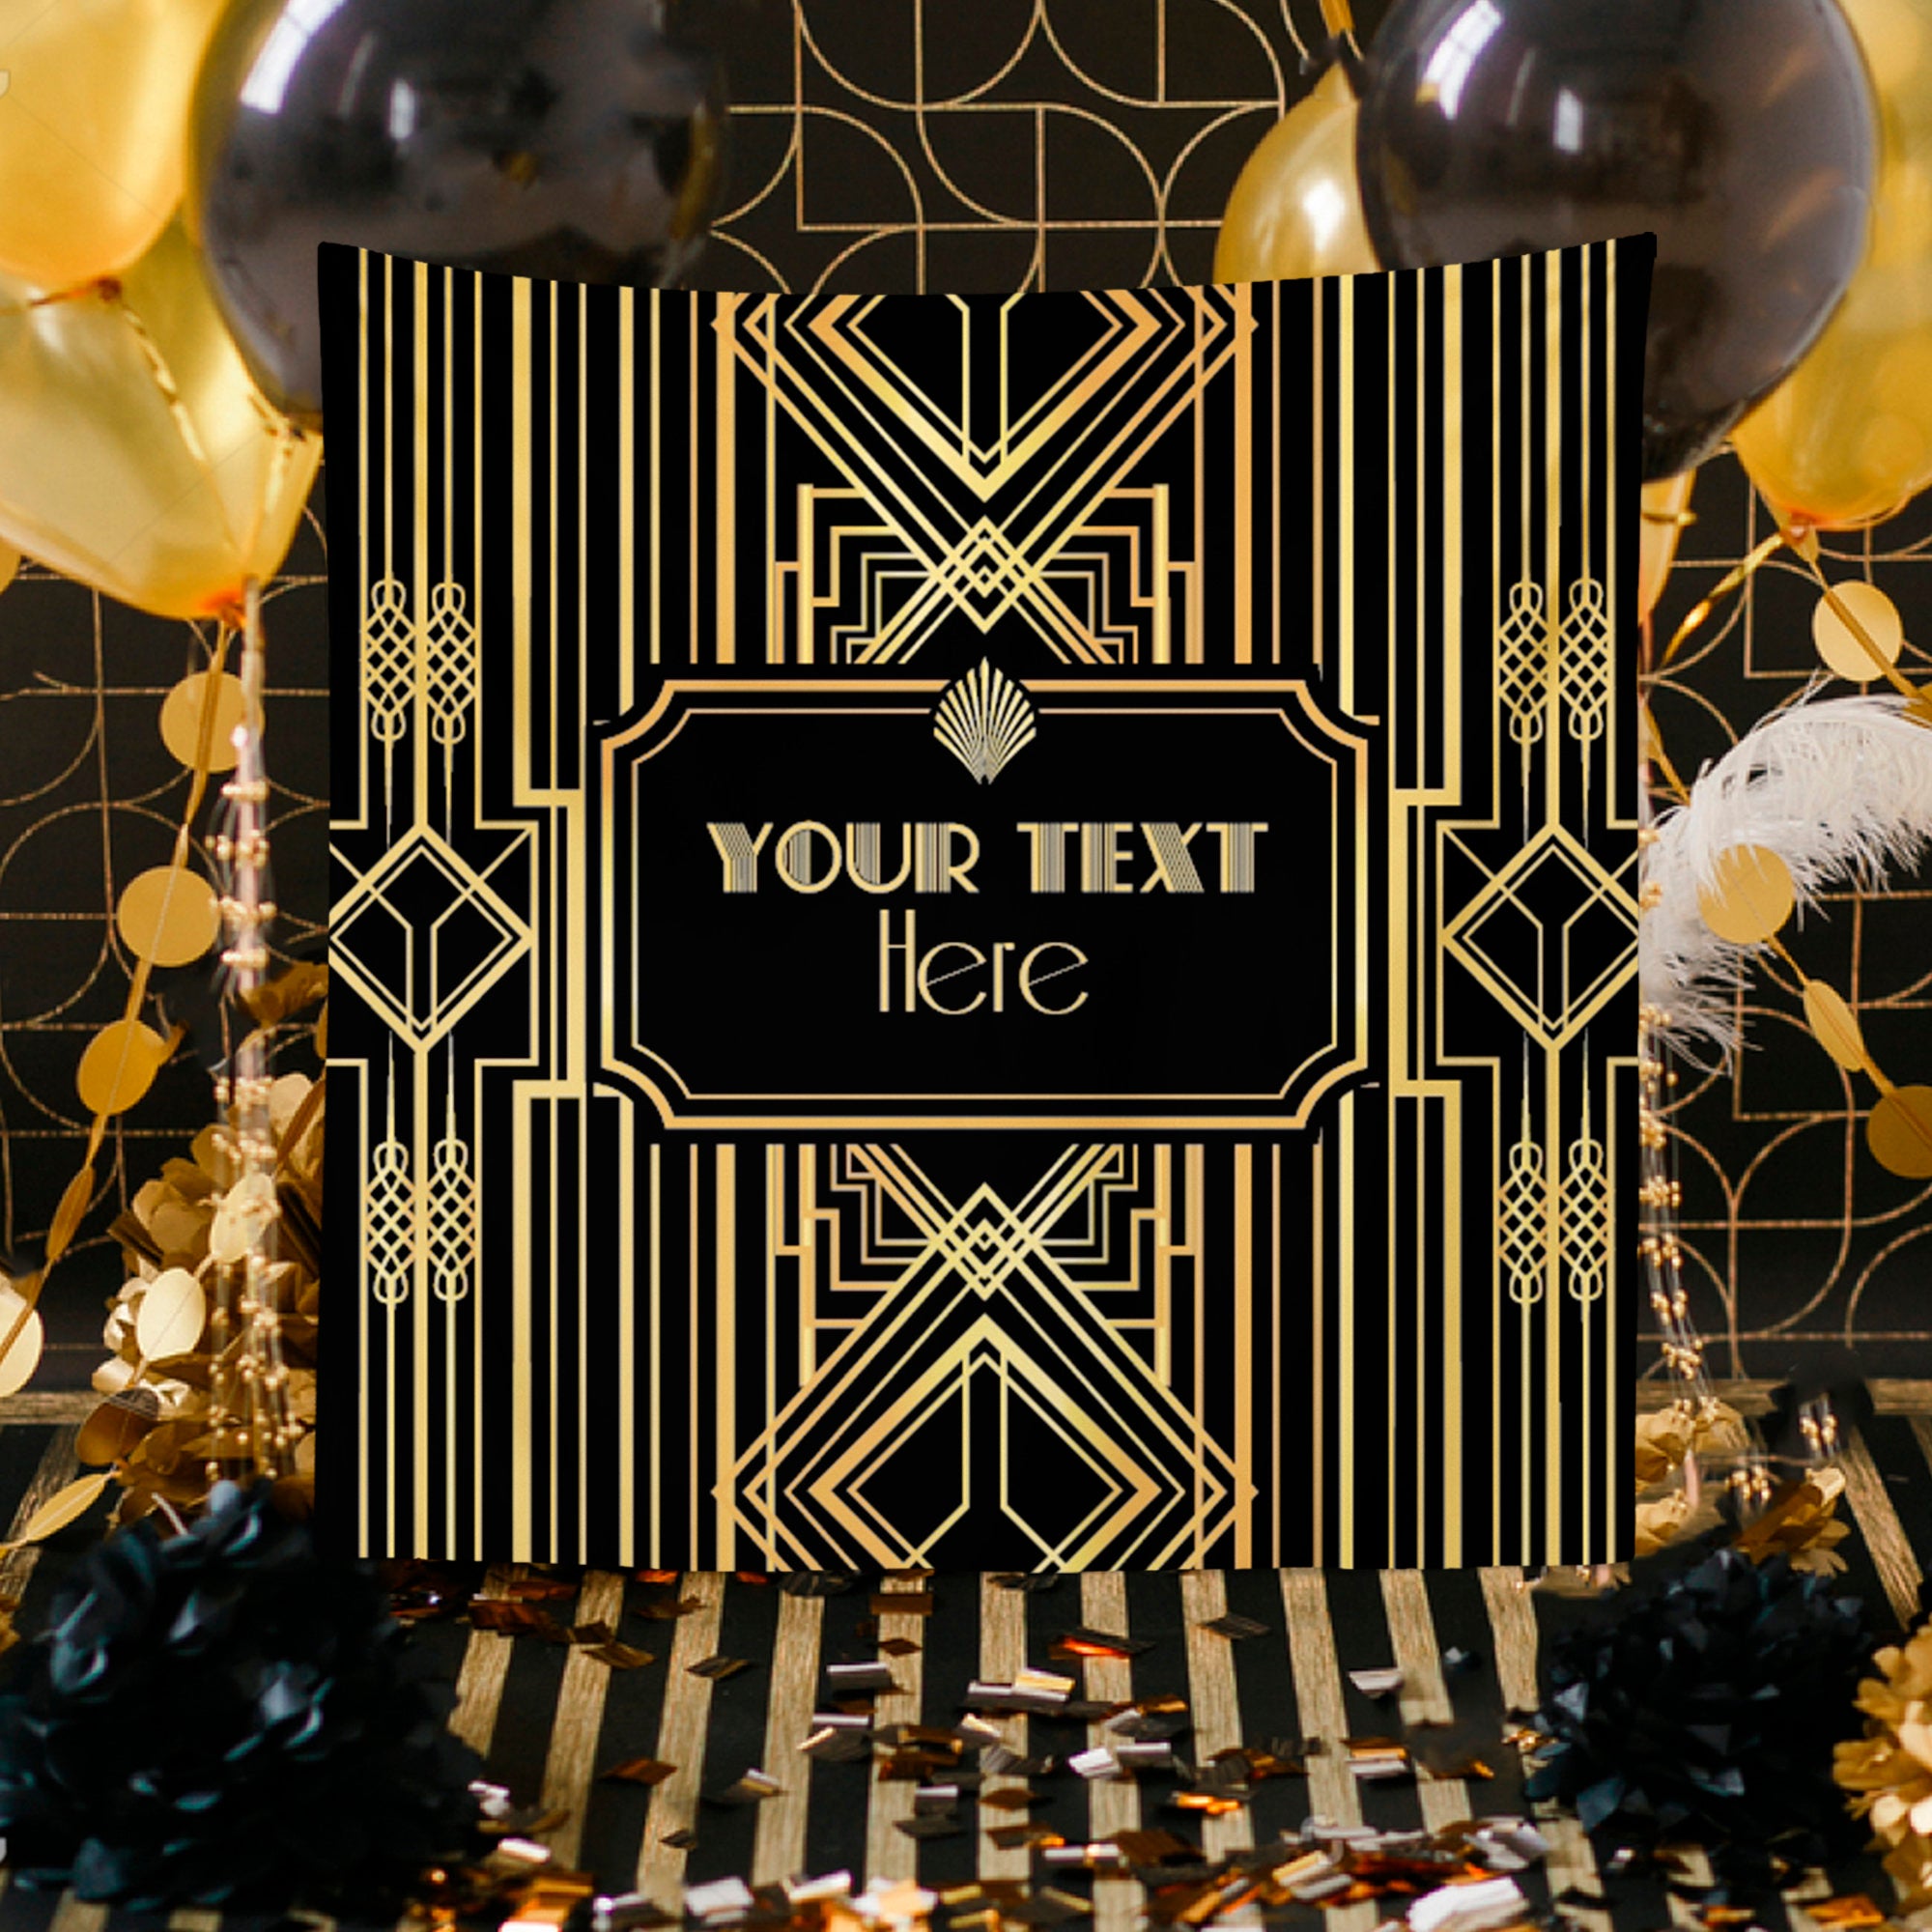 Great Gatsby Party Decorations, Gatsby Art Deco, Great Gatsby Open Bar  Sign, Roaring 20s Party Decorations, Gatsby Wedding Decorations, 